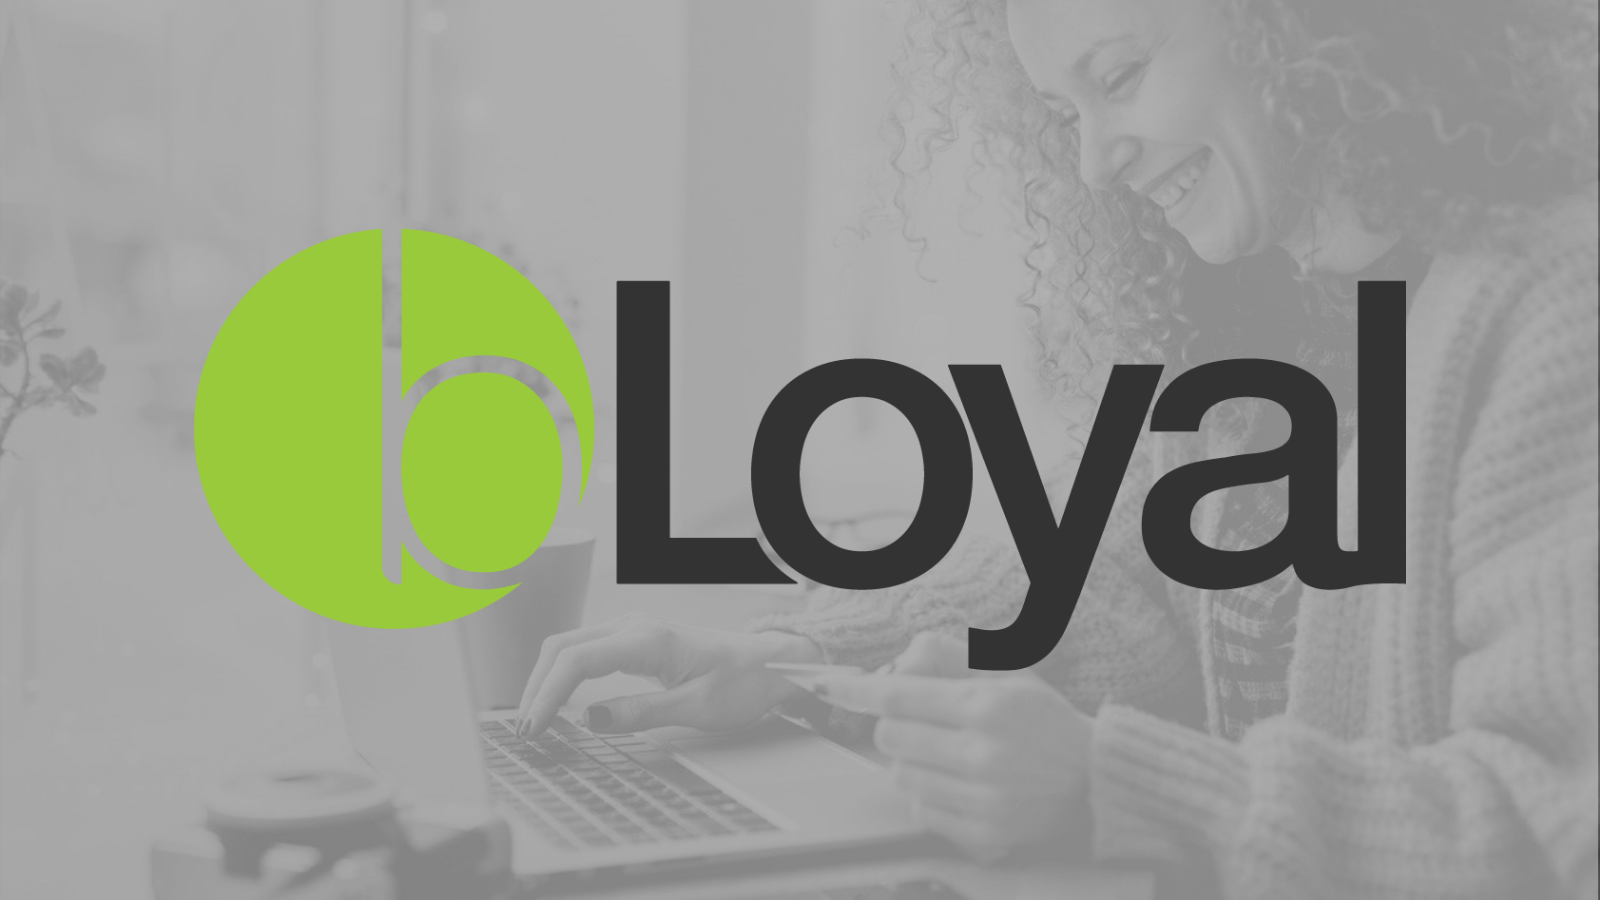 bLoyal: Loyalty & Promotions - Omni-channel Loyalty, Subscriptions ...